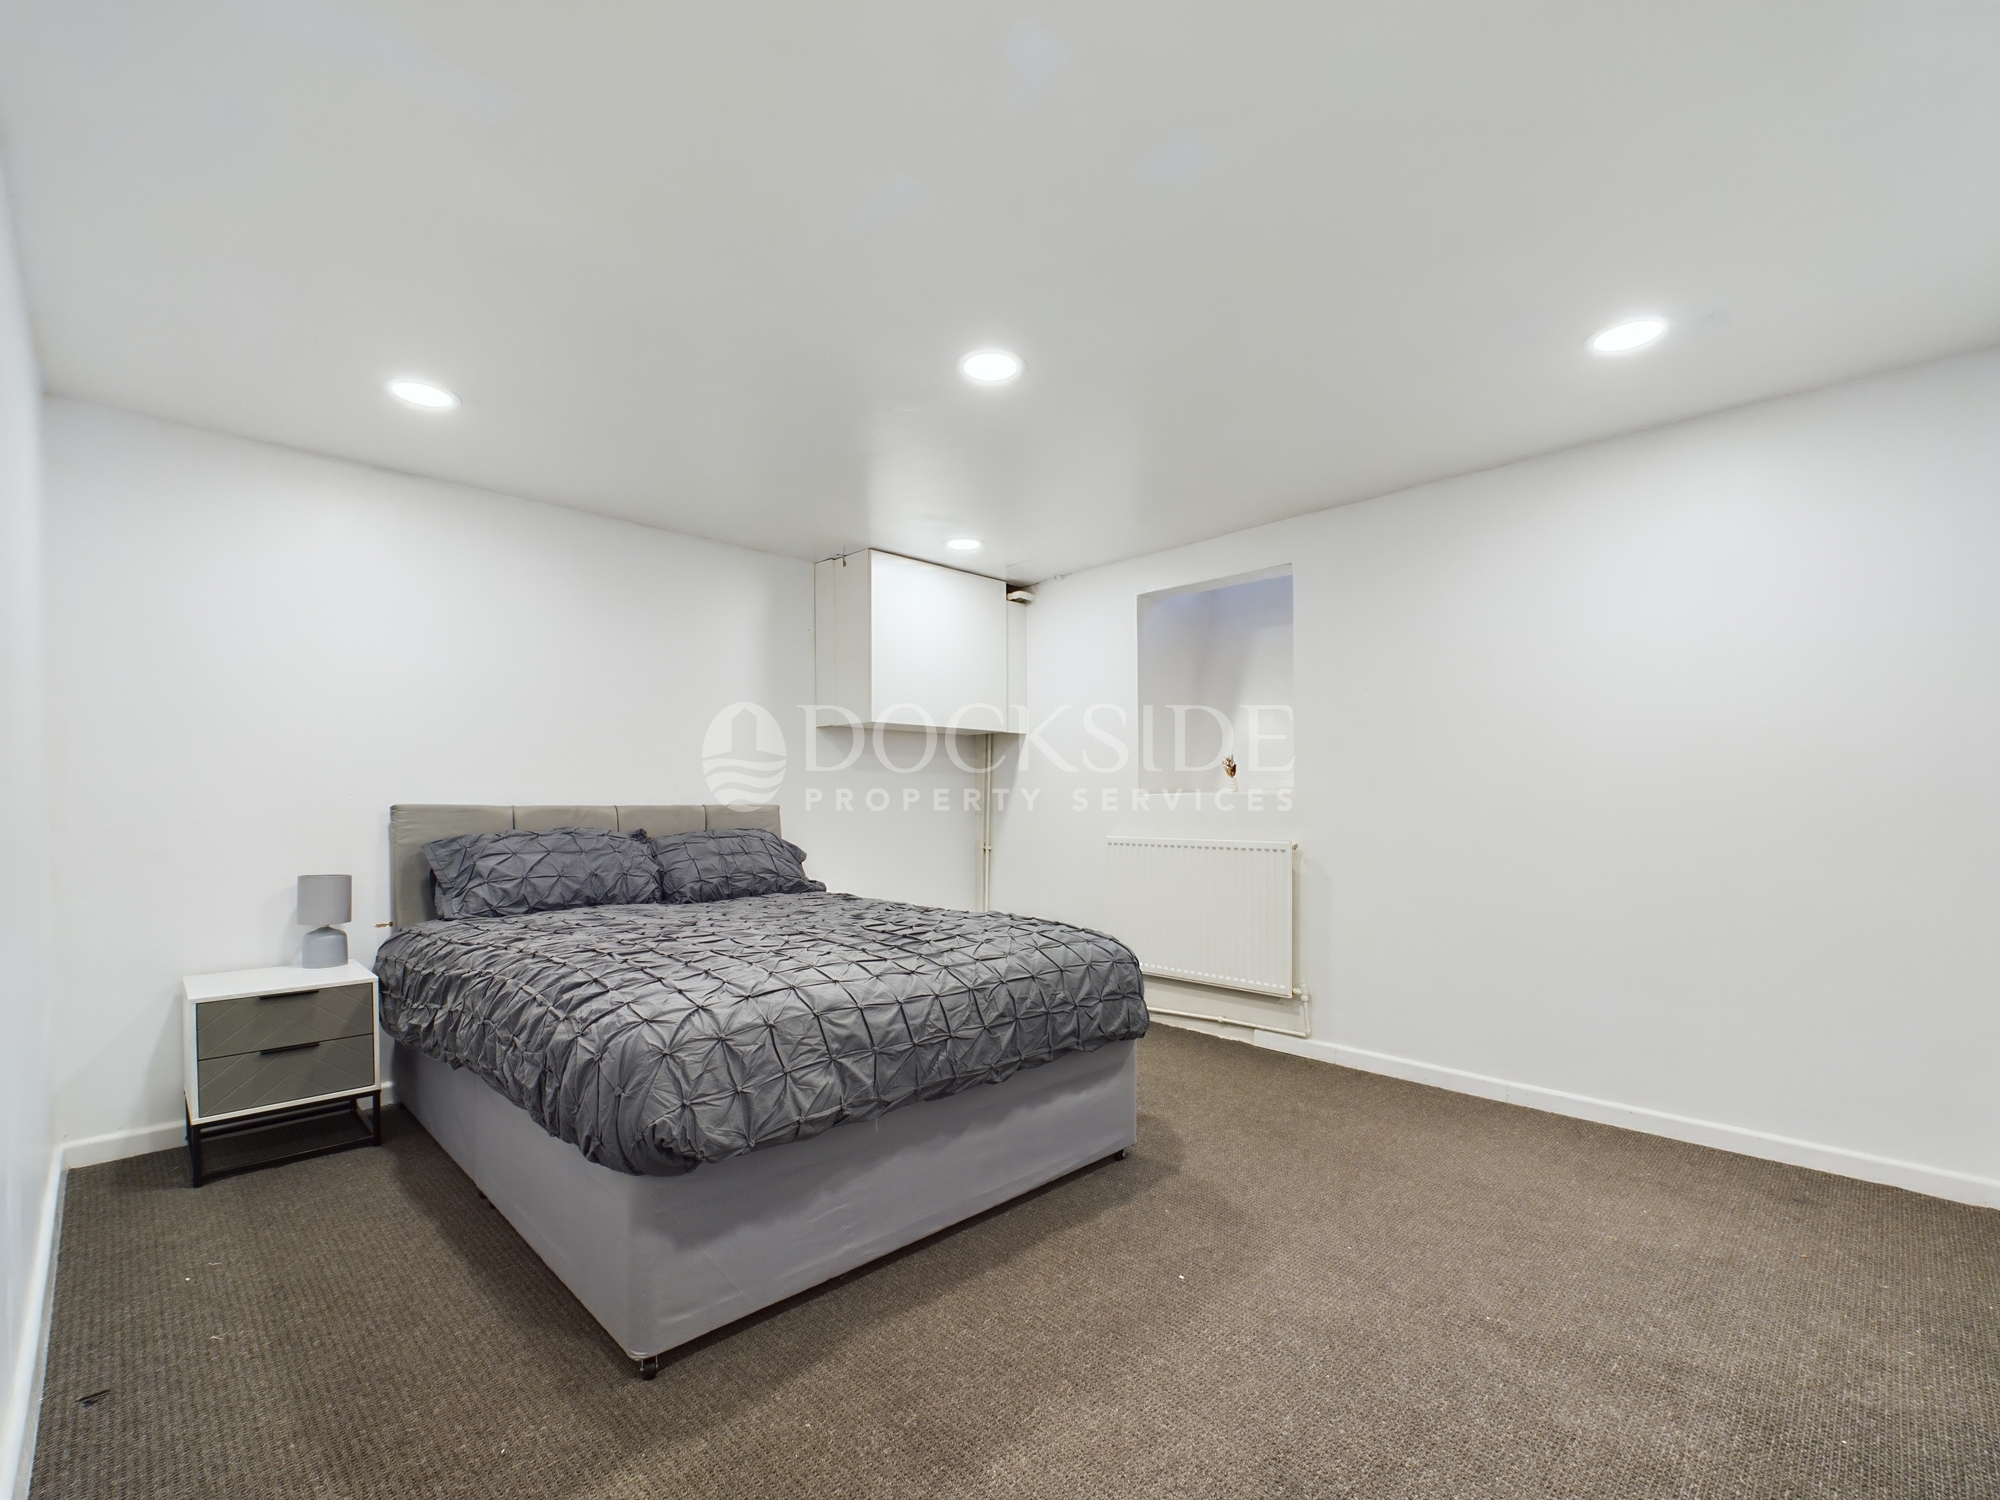 1 bed to rent in Theodore Place, Gillingham - Property Image 1